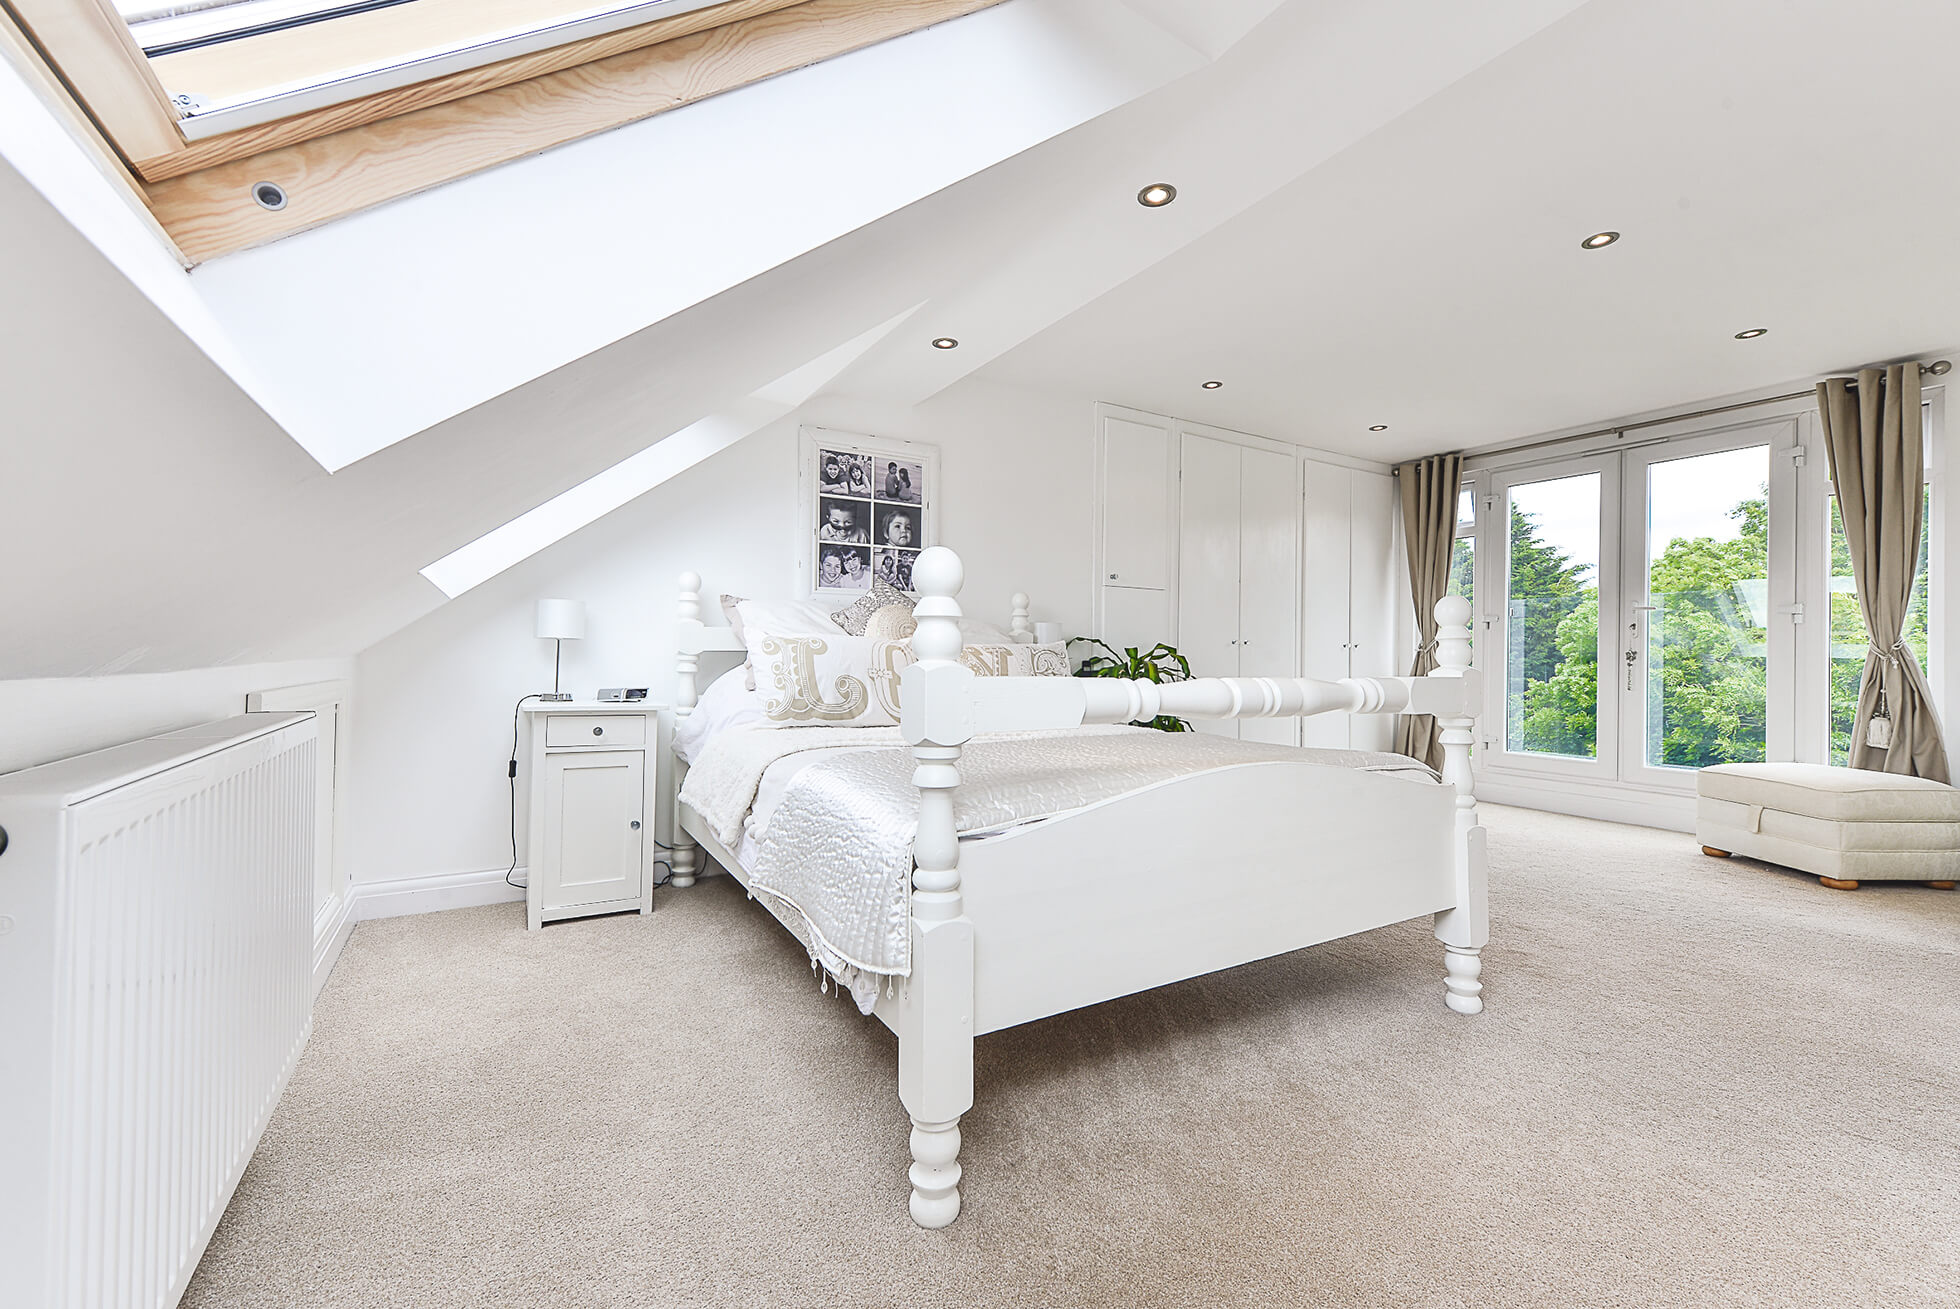 Do you have a question about converting your Loft in Highfield? Here are the most popular questions asked by our clients.